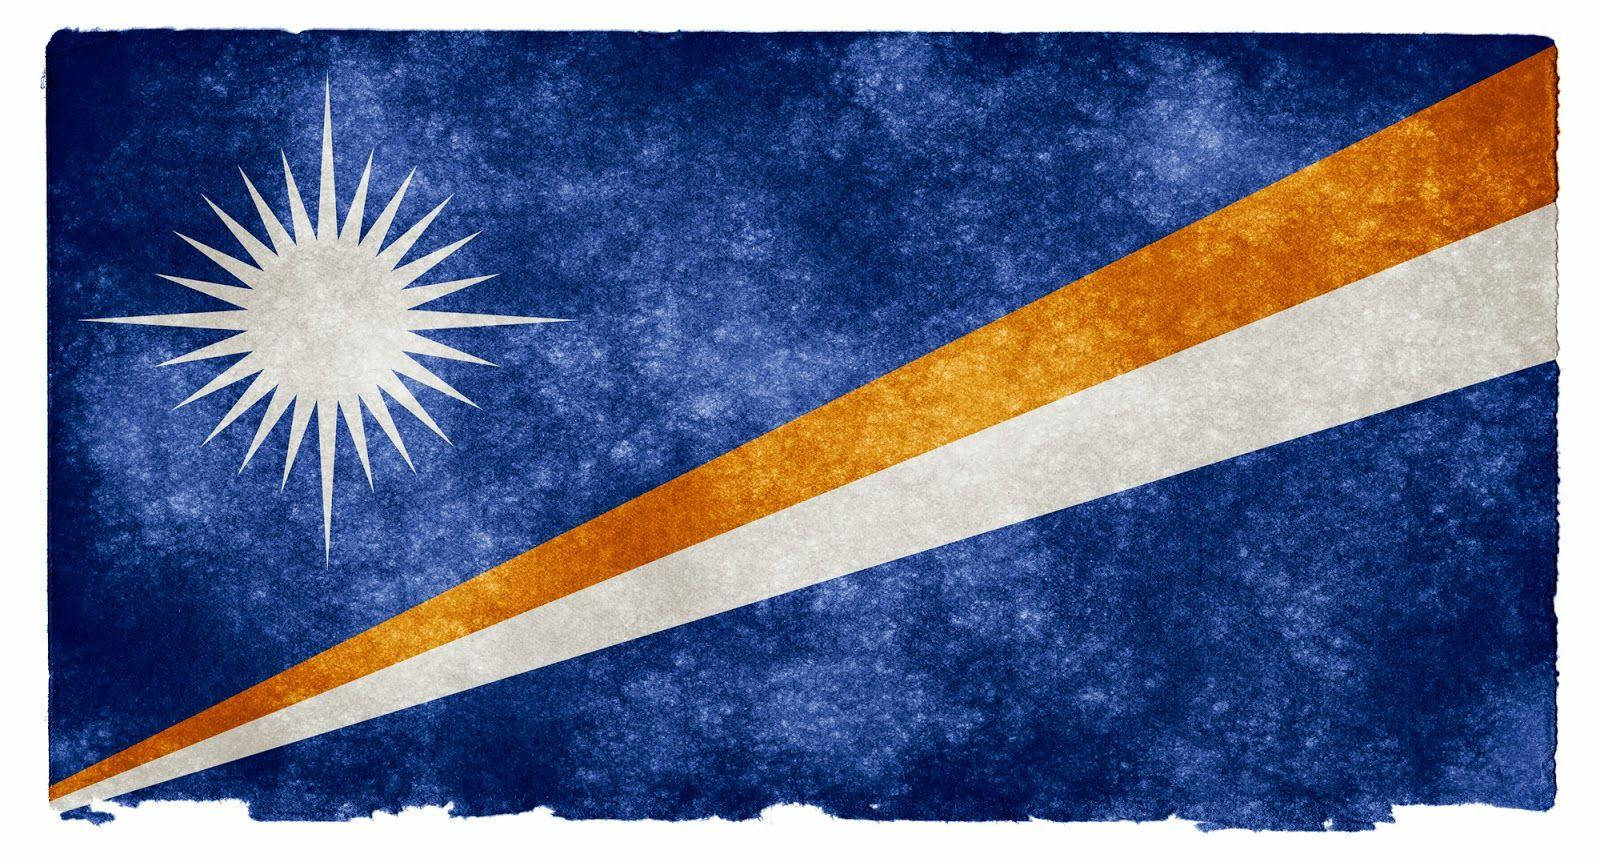 Caption: Strong Pride Of The Marshall Islands - A Tattered Flag Background